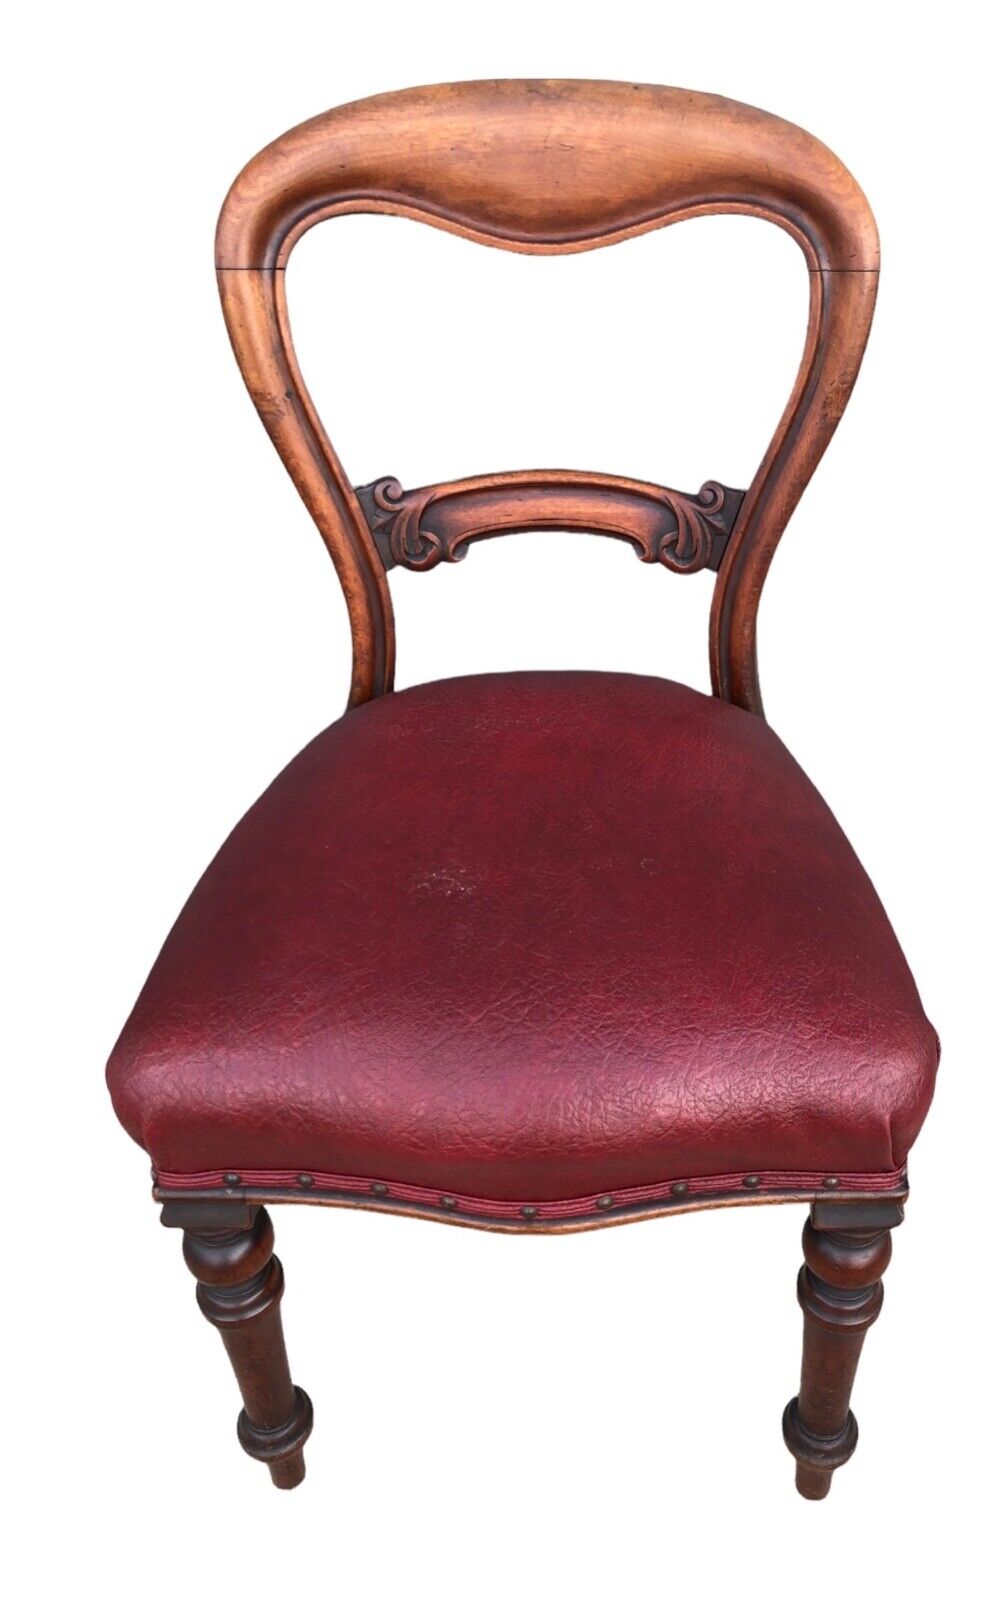 000933....Handsome Set Of Four Antique Mahogany Dining Chairs ( sold )